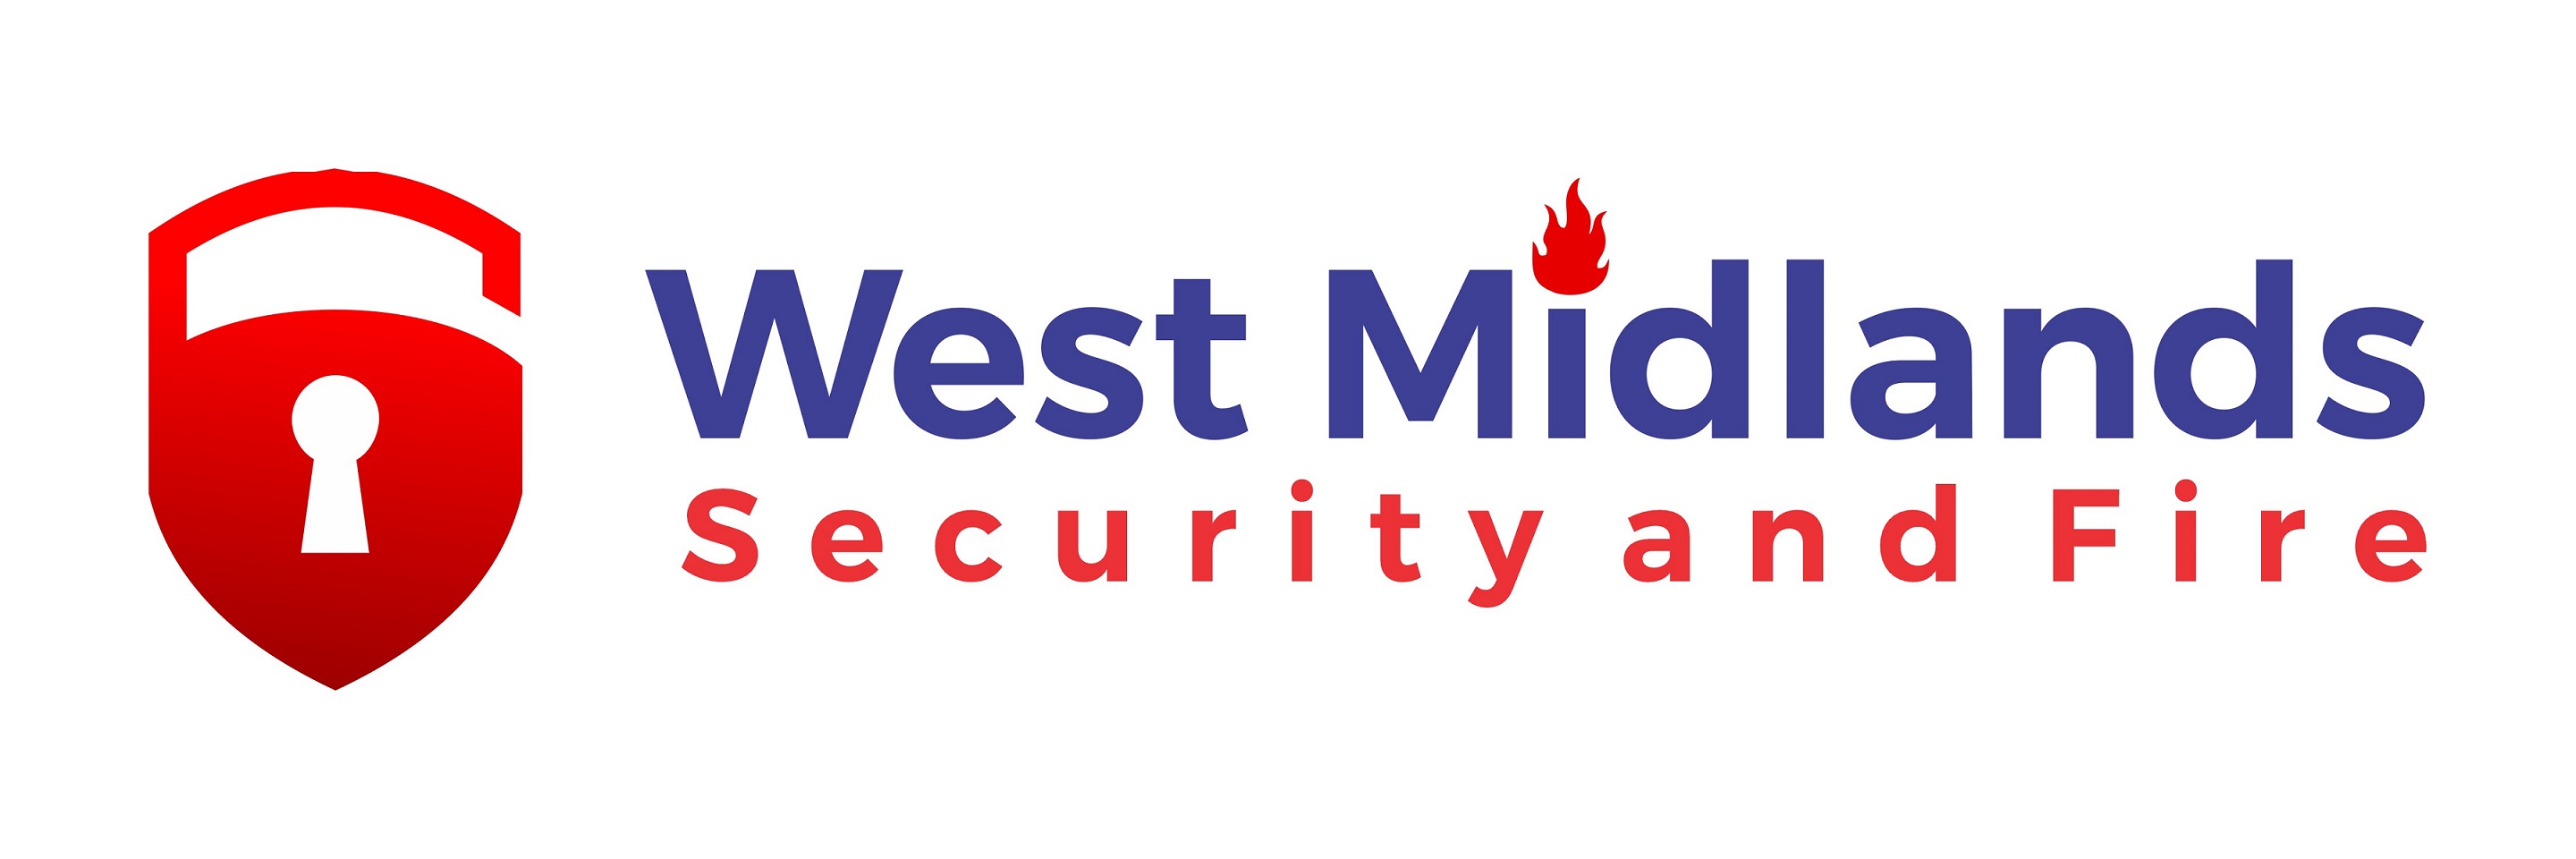 West Midlands Security and Fire 2020 logo 